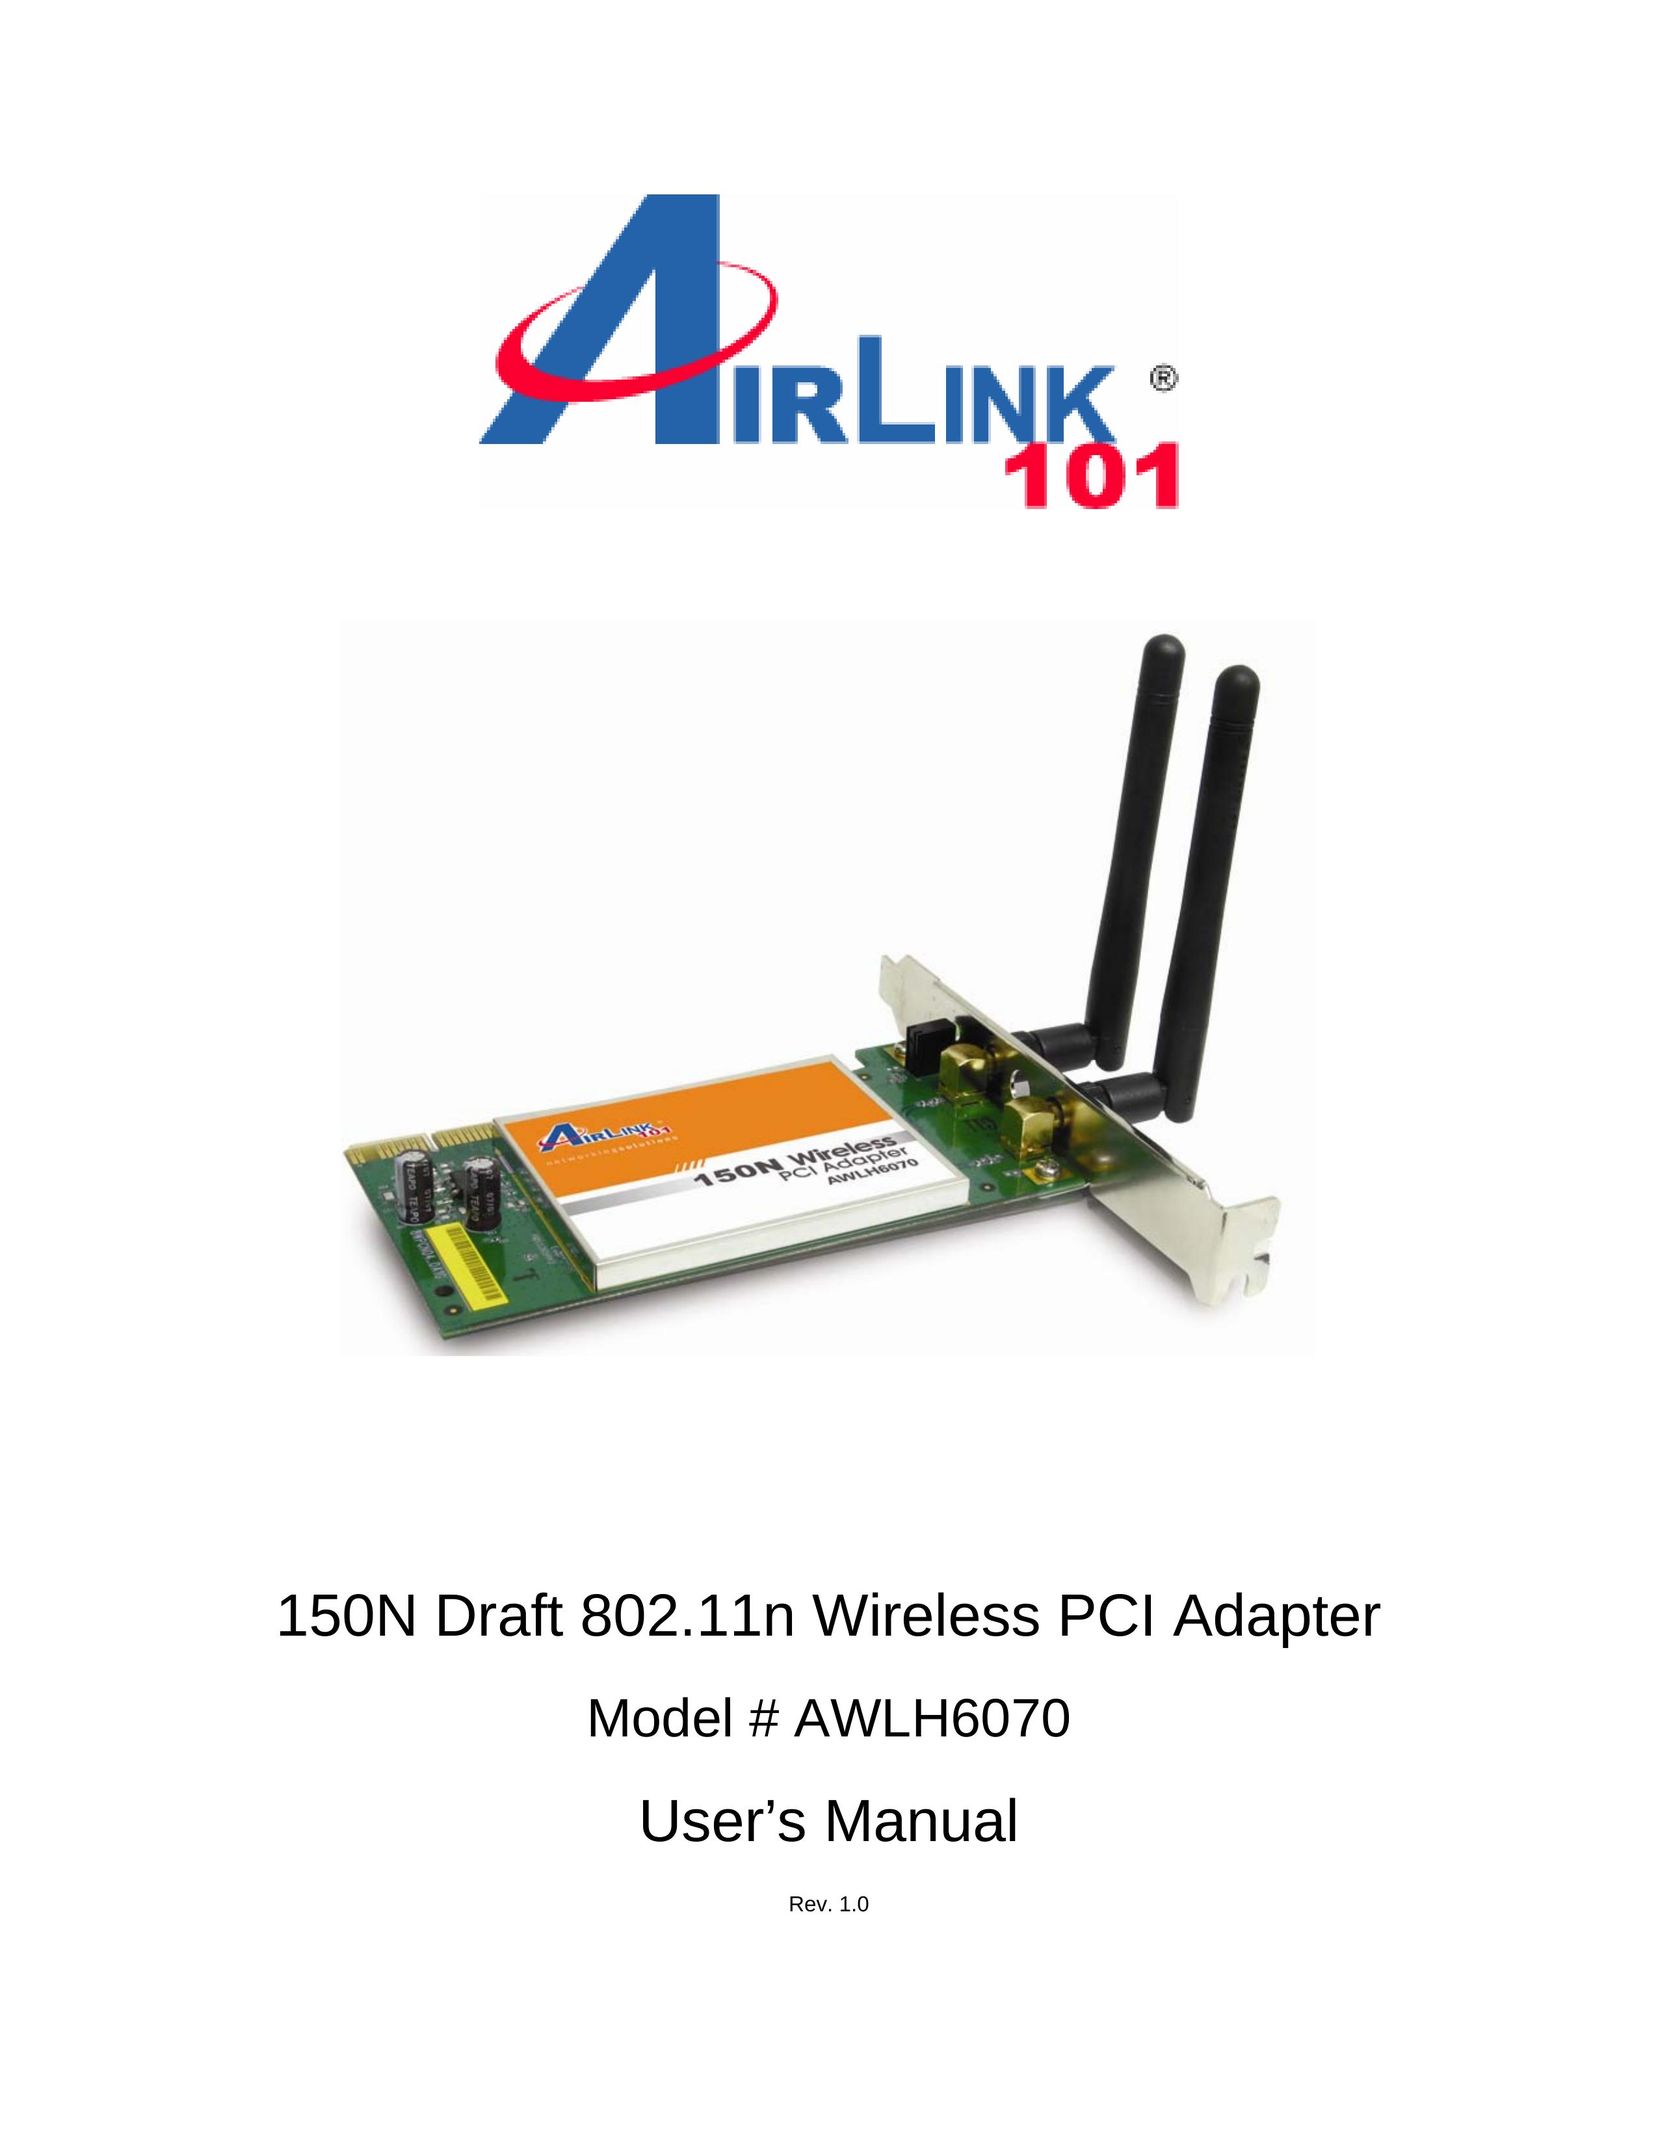 Airlink101 AWLH6070 Network Card User Manual